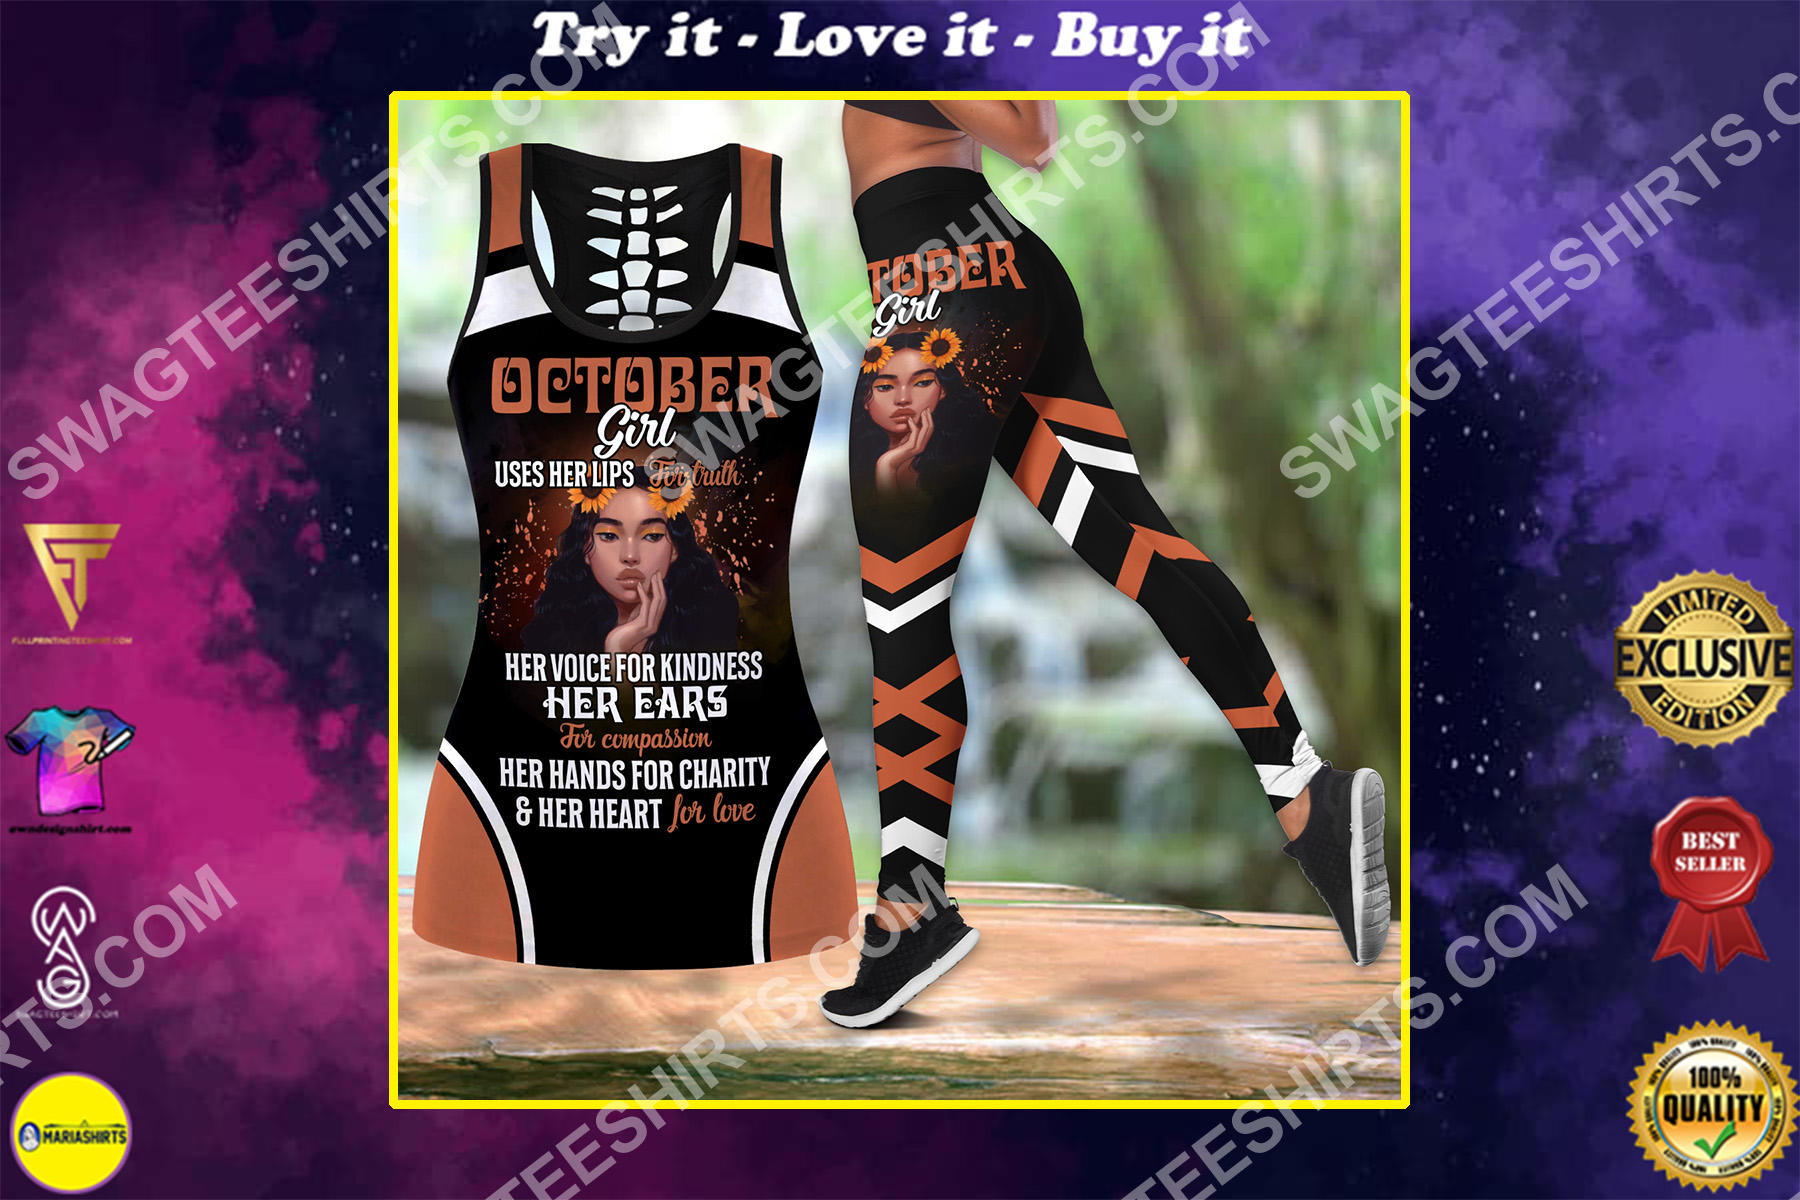 october girl uses her lips for truth birthday gift set sports outfit